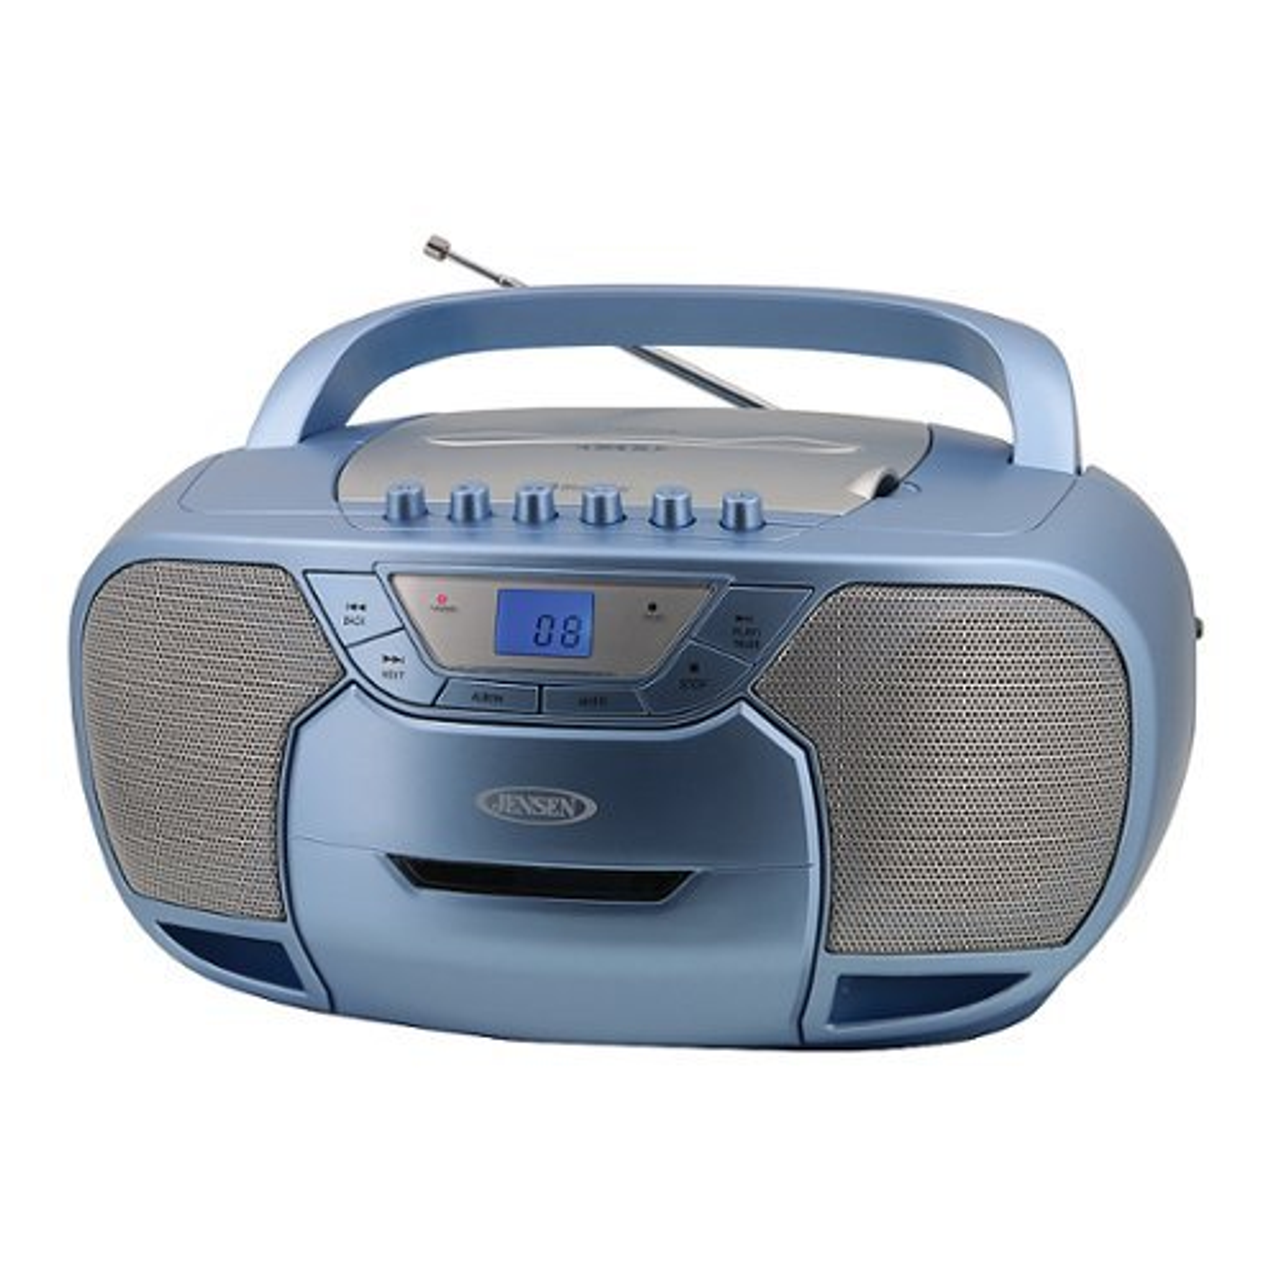 Jensen - Portable Bluetooth Stereo with AM/FM, CD, Cassette Player, Ambient Blue Lighting, Aux Line-in and Headphone Jack - Blue